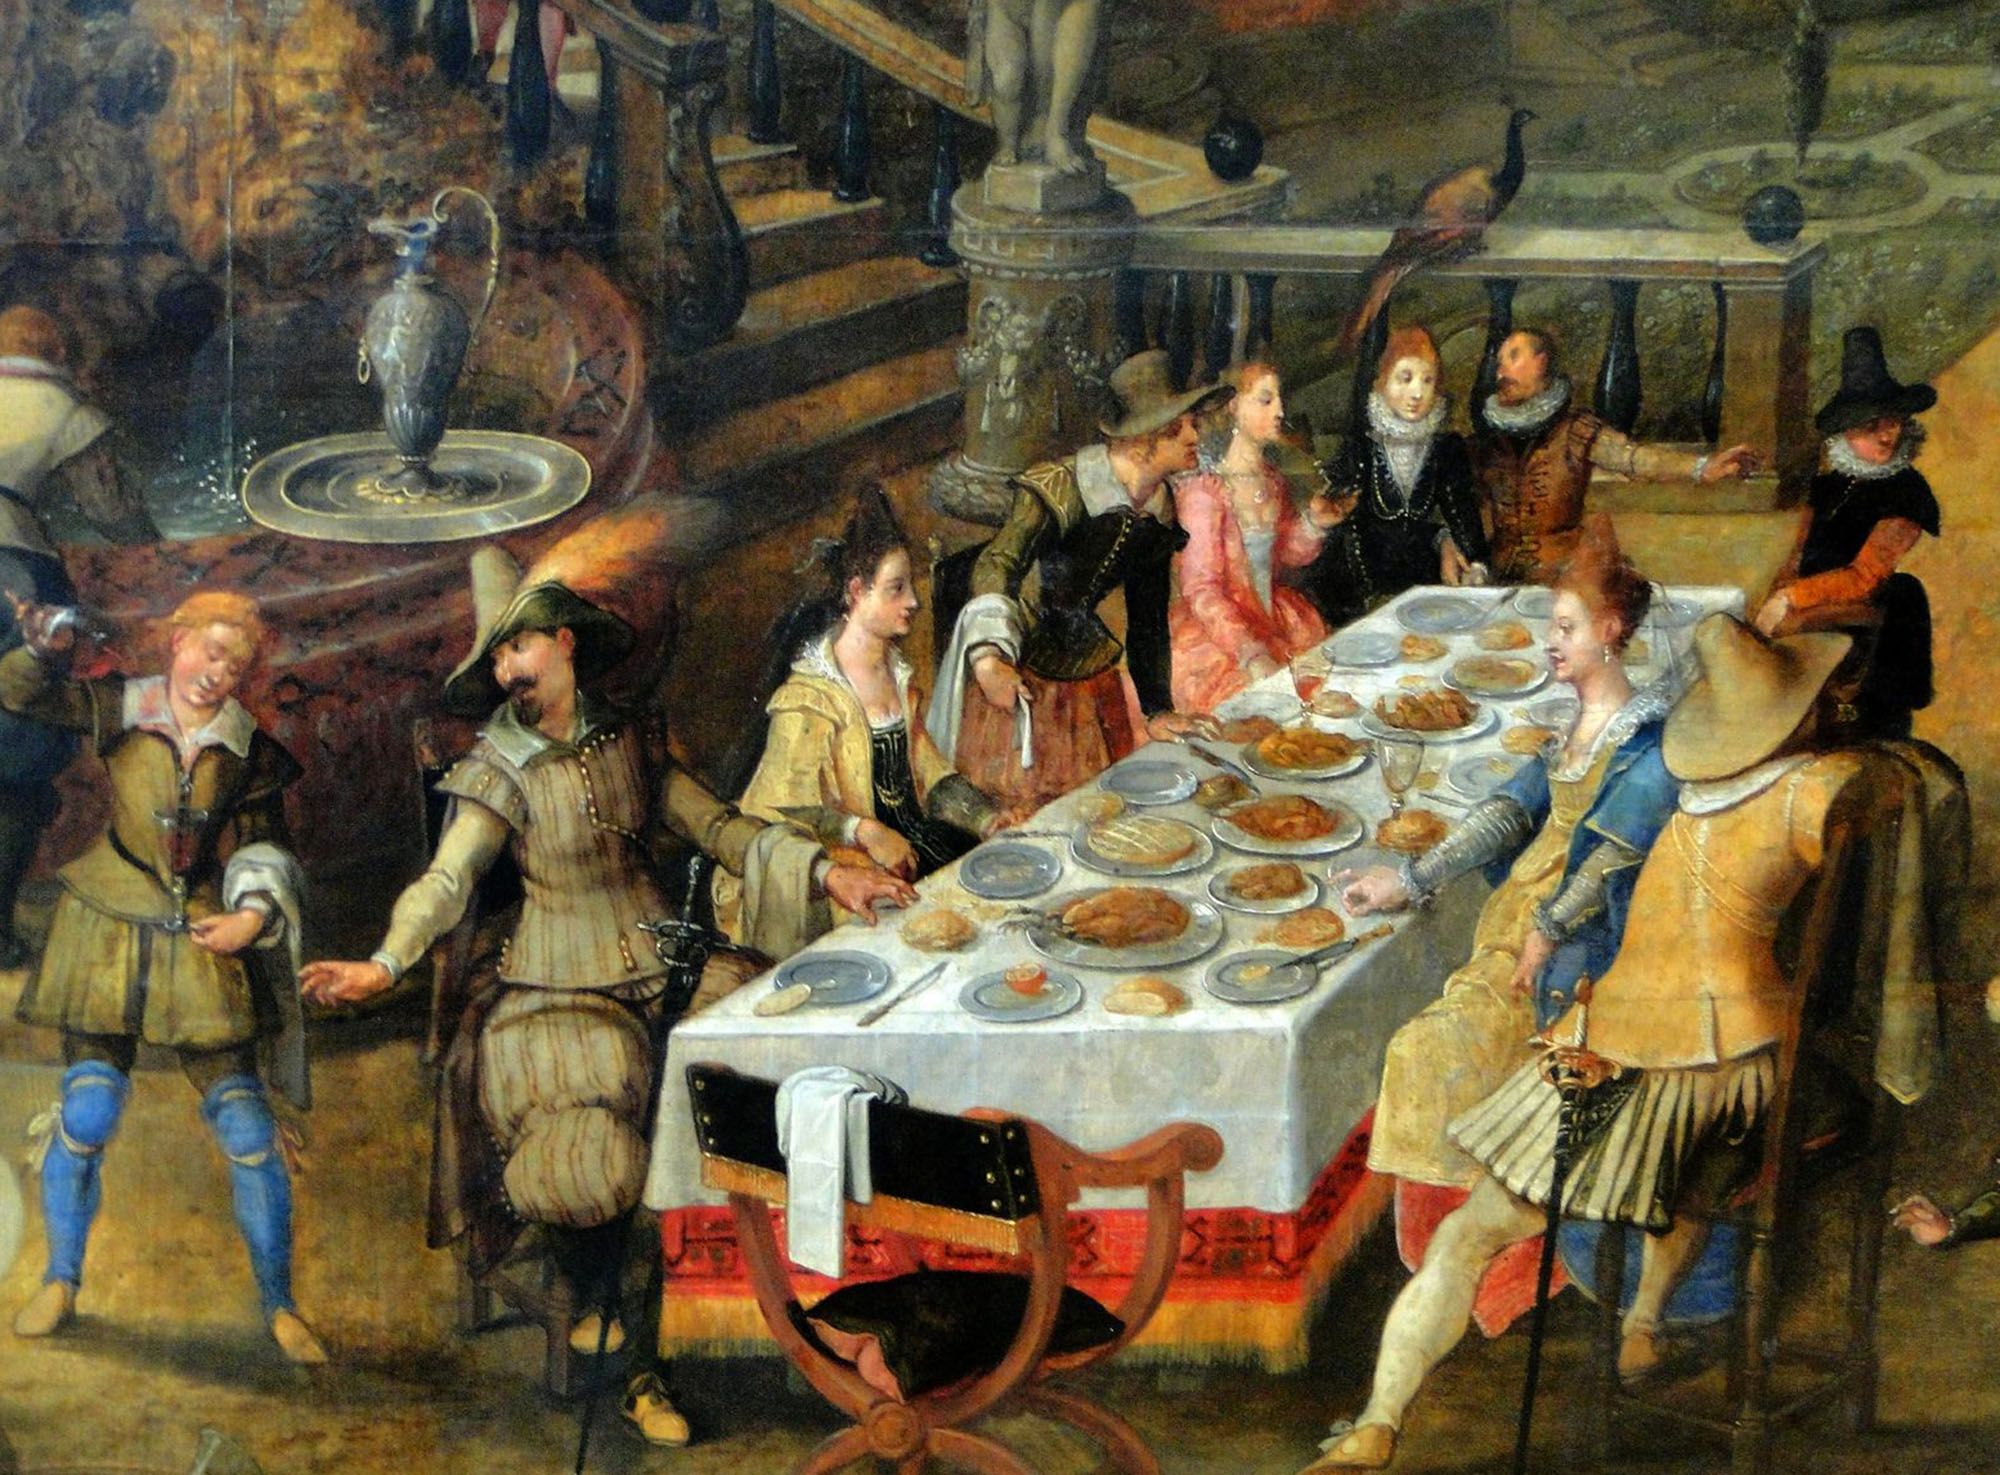 Most large feasts in the Renaissance had cooked swan and salmon. After the meal, hands were washed in a pool of lemon scented water. Spoons were used for soups, knives for meat and hands for everything else. Certain fingers were raised during dishes to allow clean fingers for the next dish.